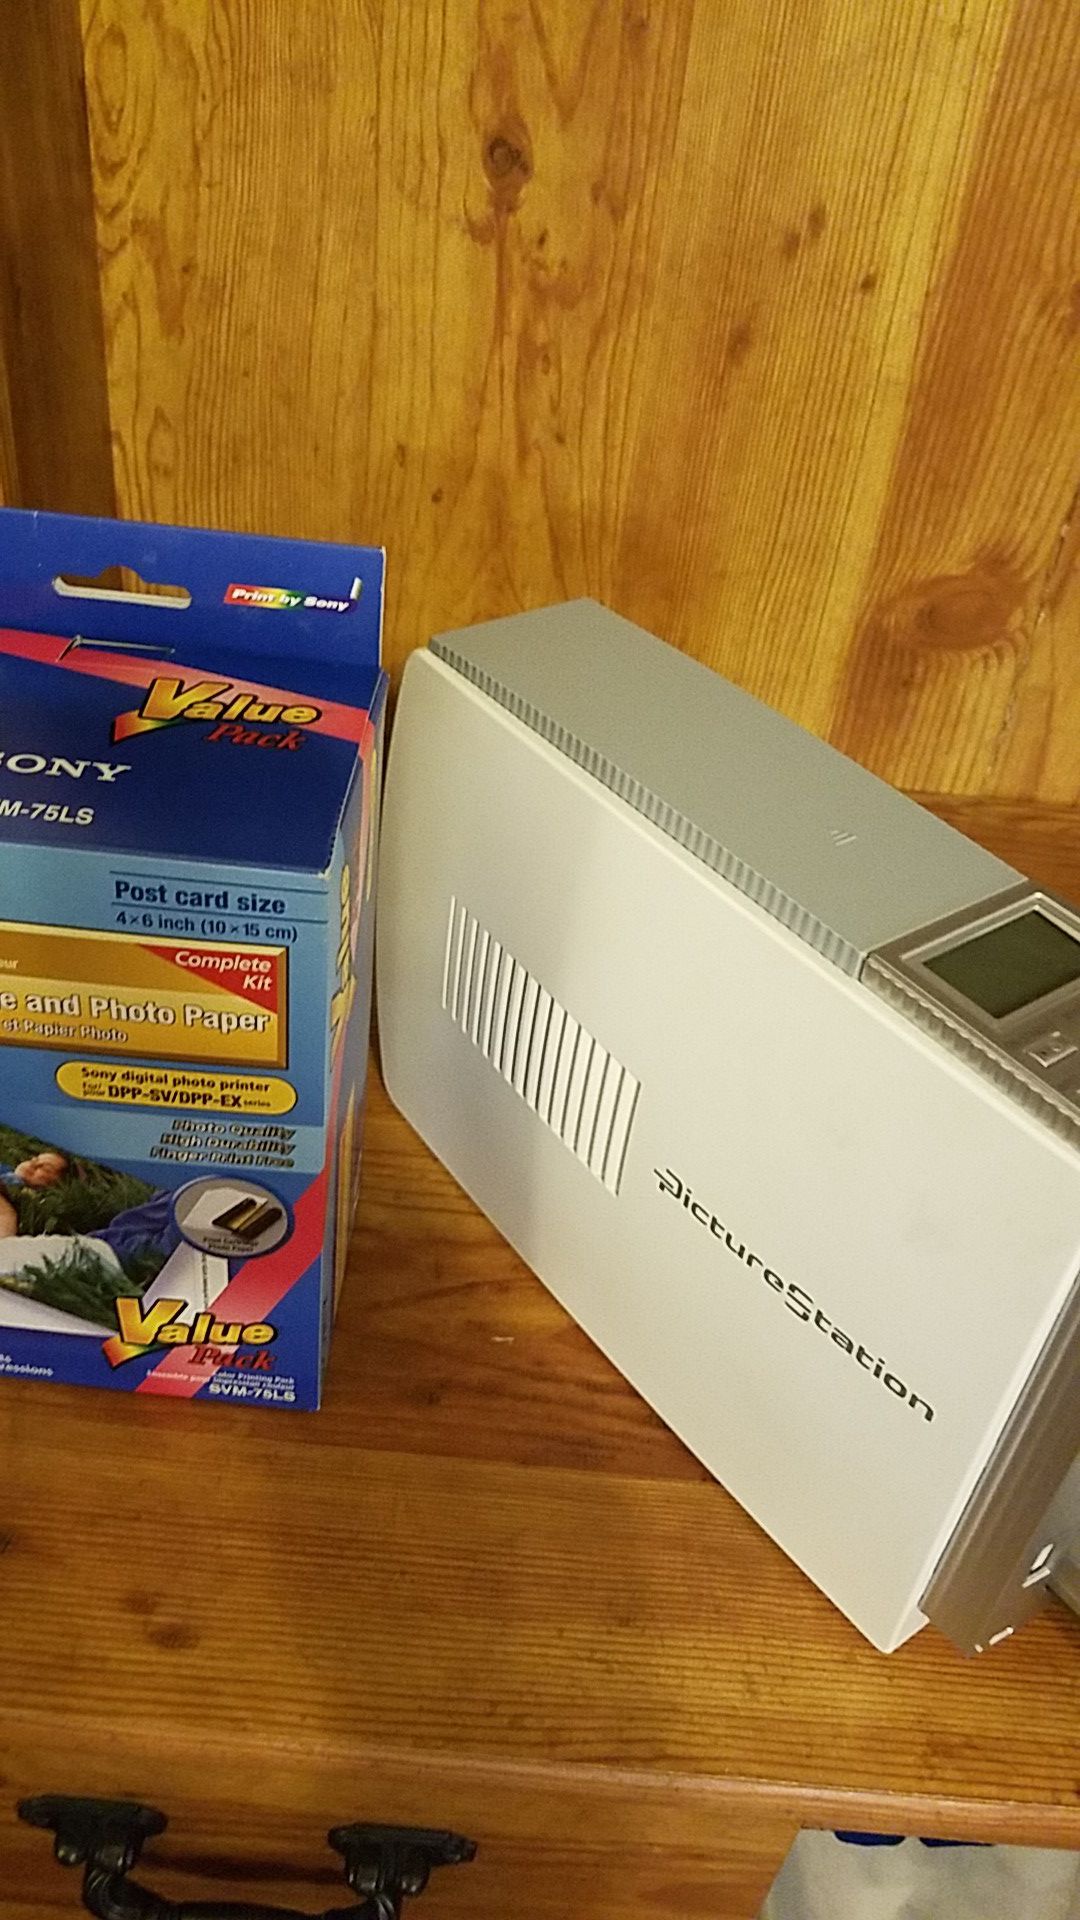 Sony Picture Station digital photo printer